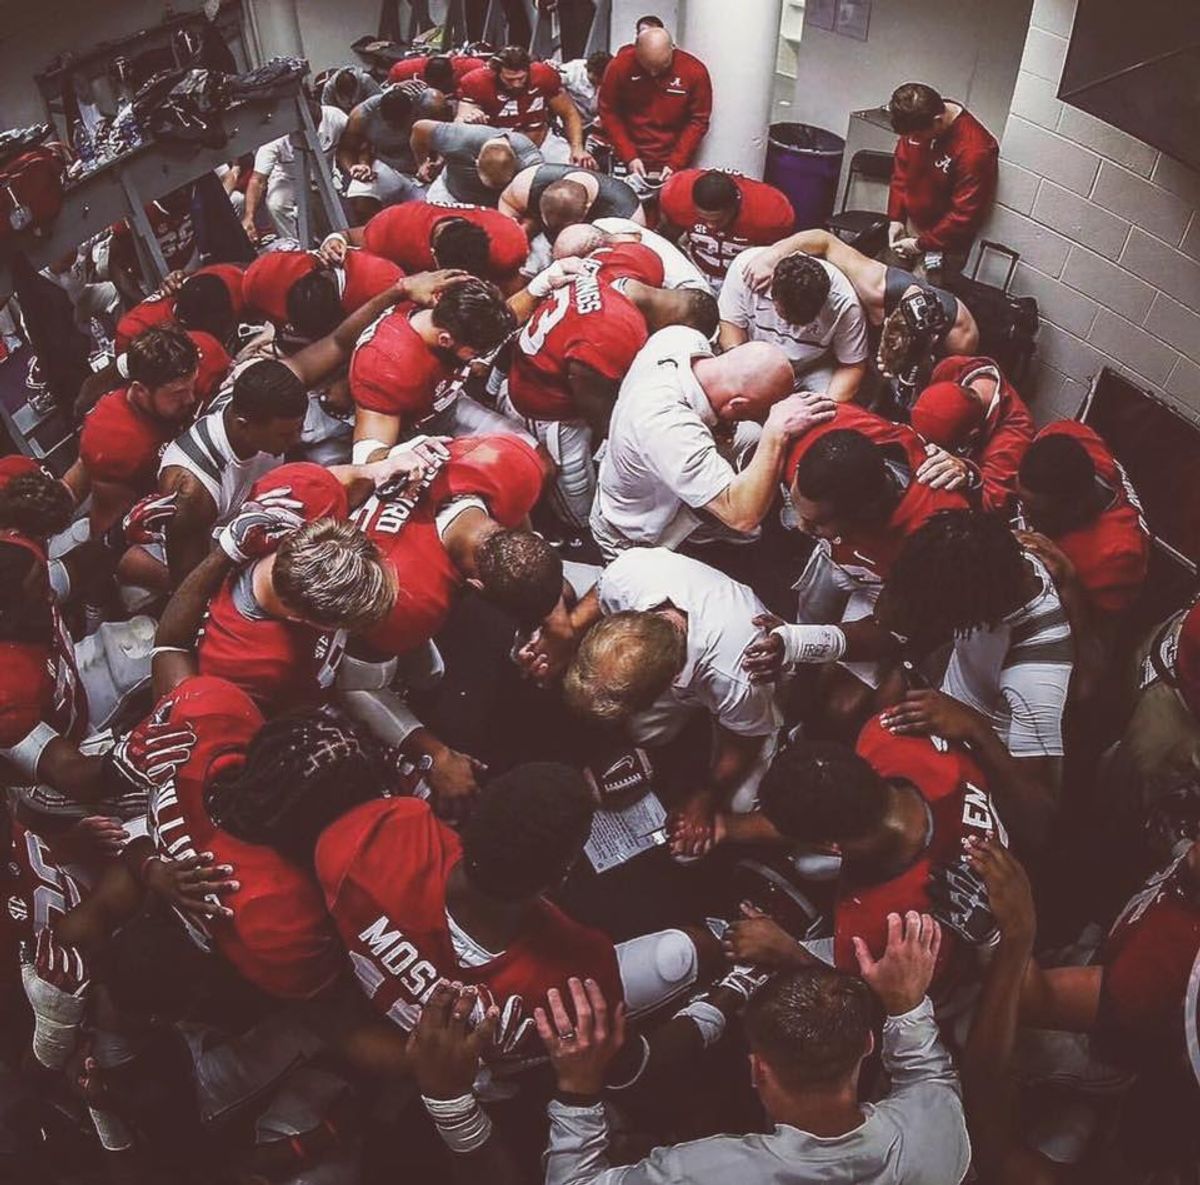 What It's Like To Lose The National Championship At The University Of Alabama